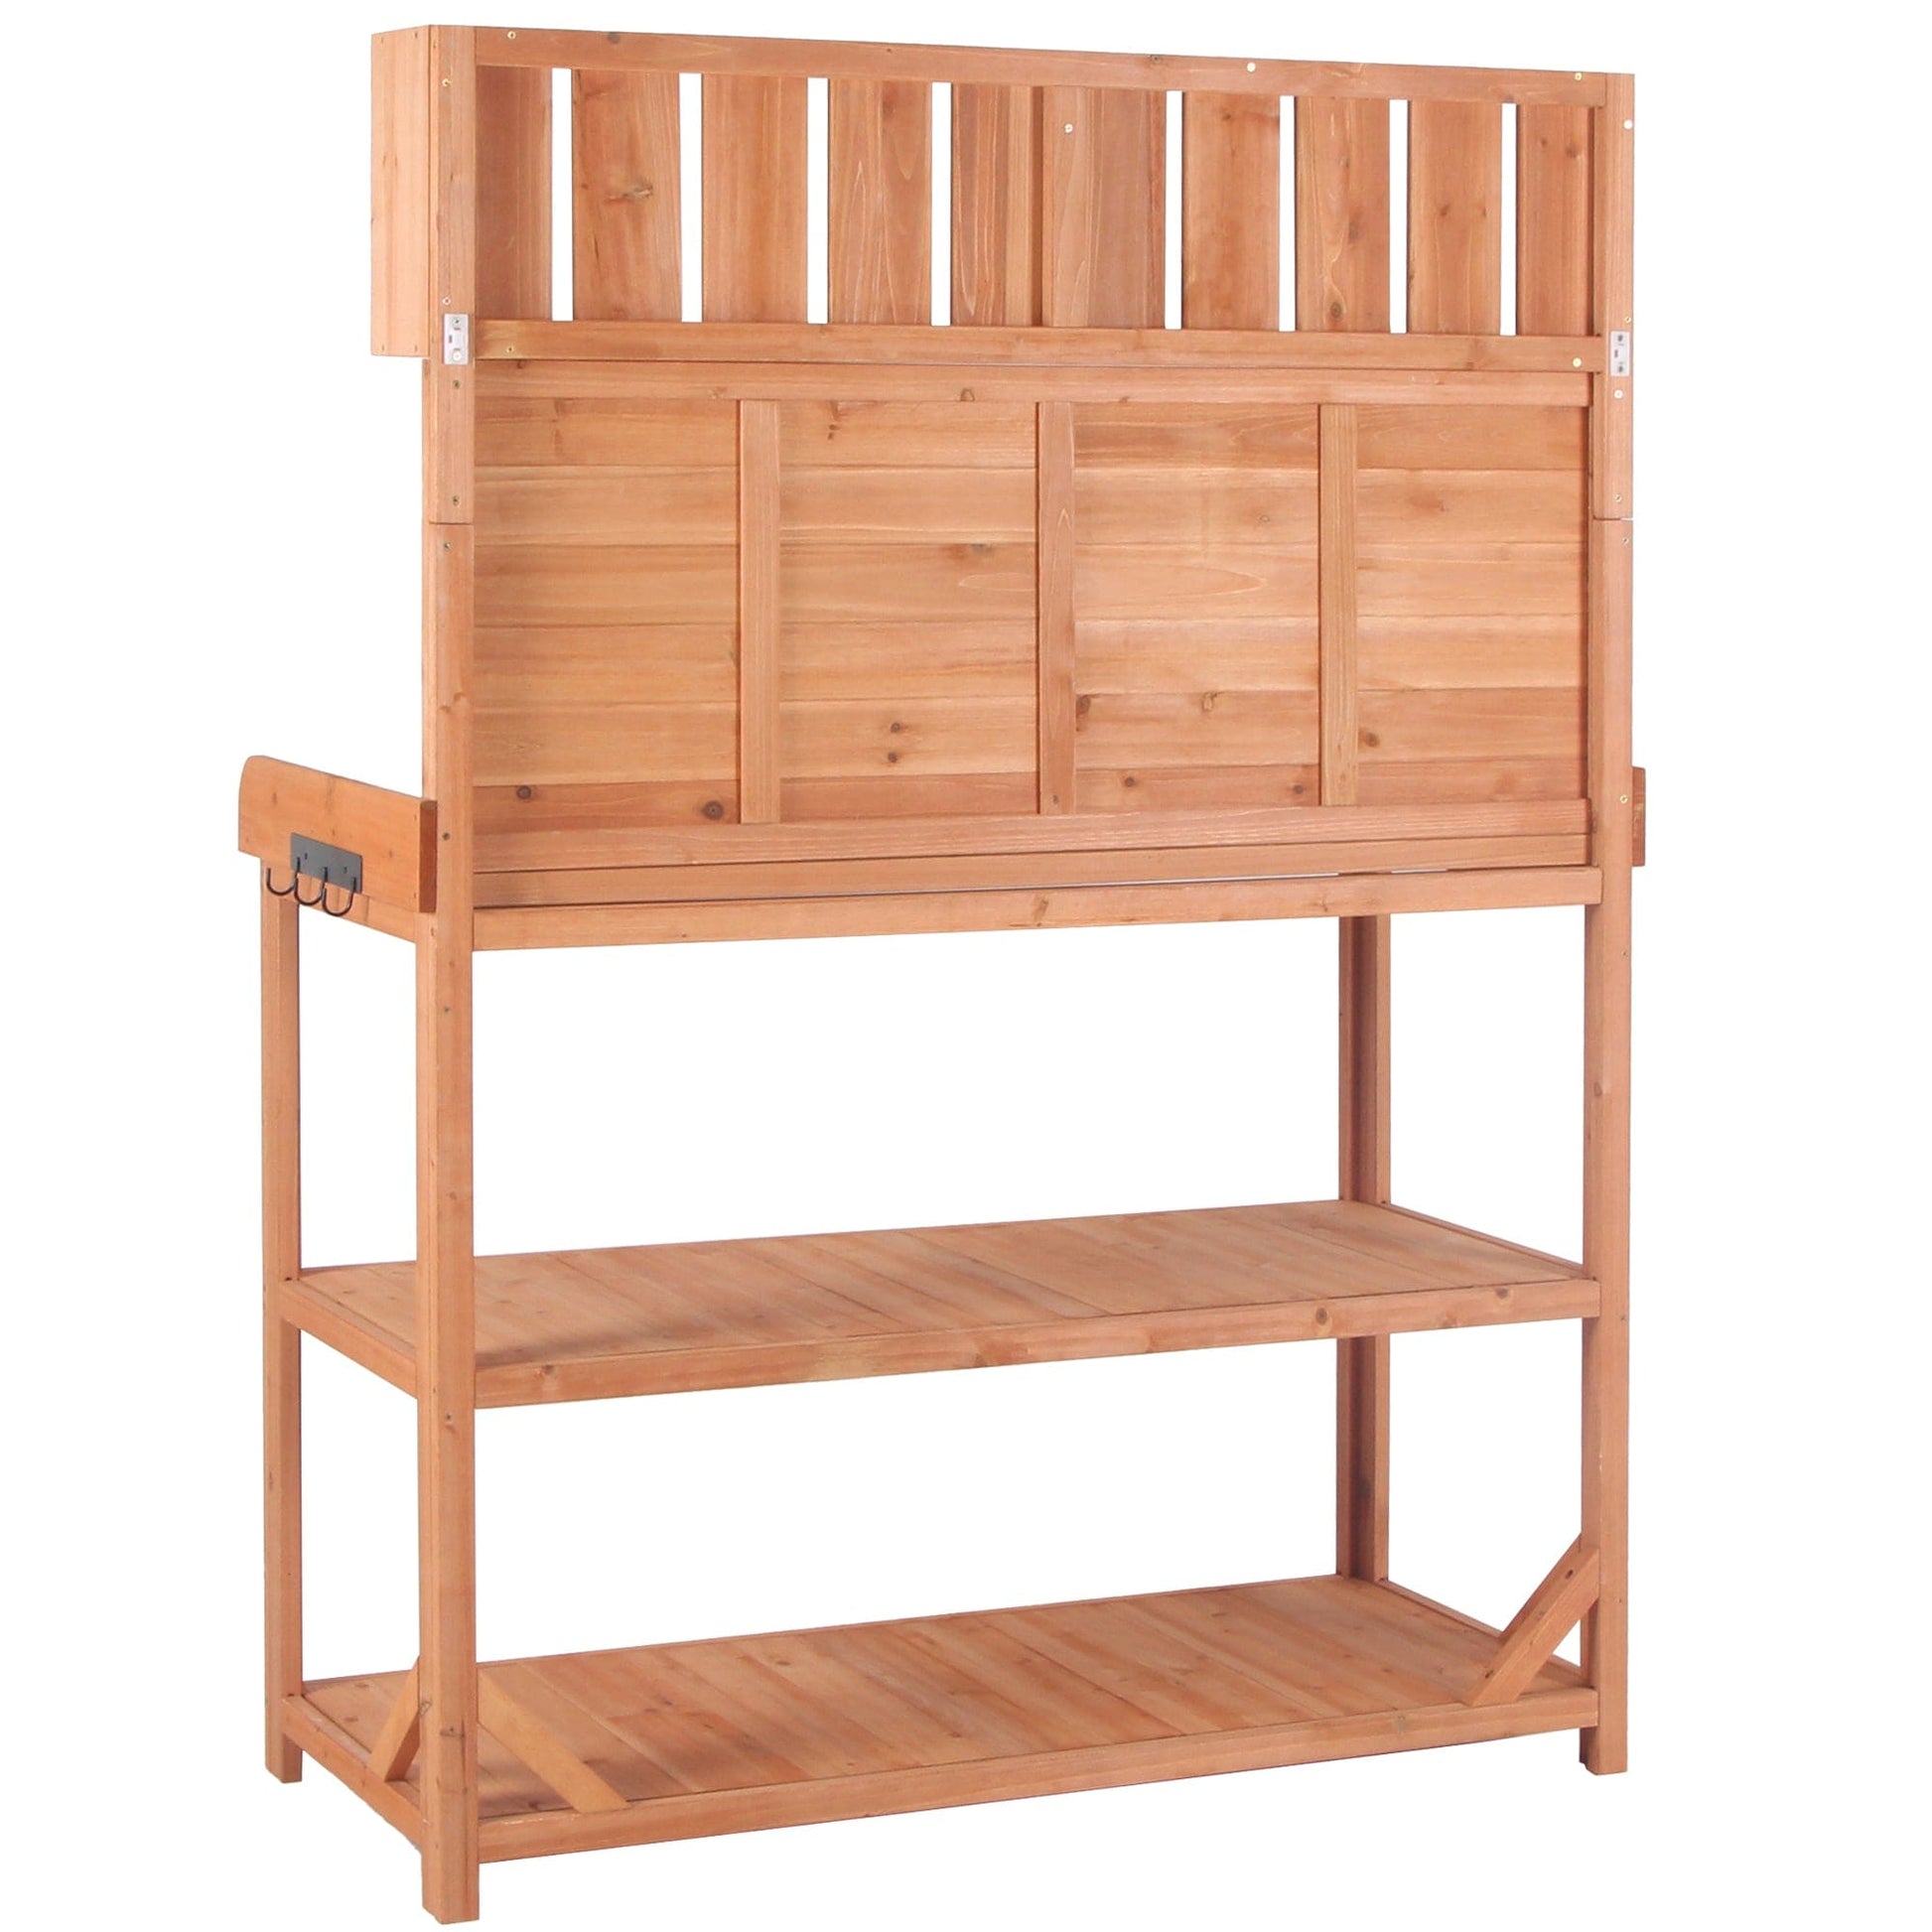 1st Choice Furniture Direct Potting Bench 1st Choice 65" Wooden Garden Potting Bench w/ 4 Shelves and Side Hook